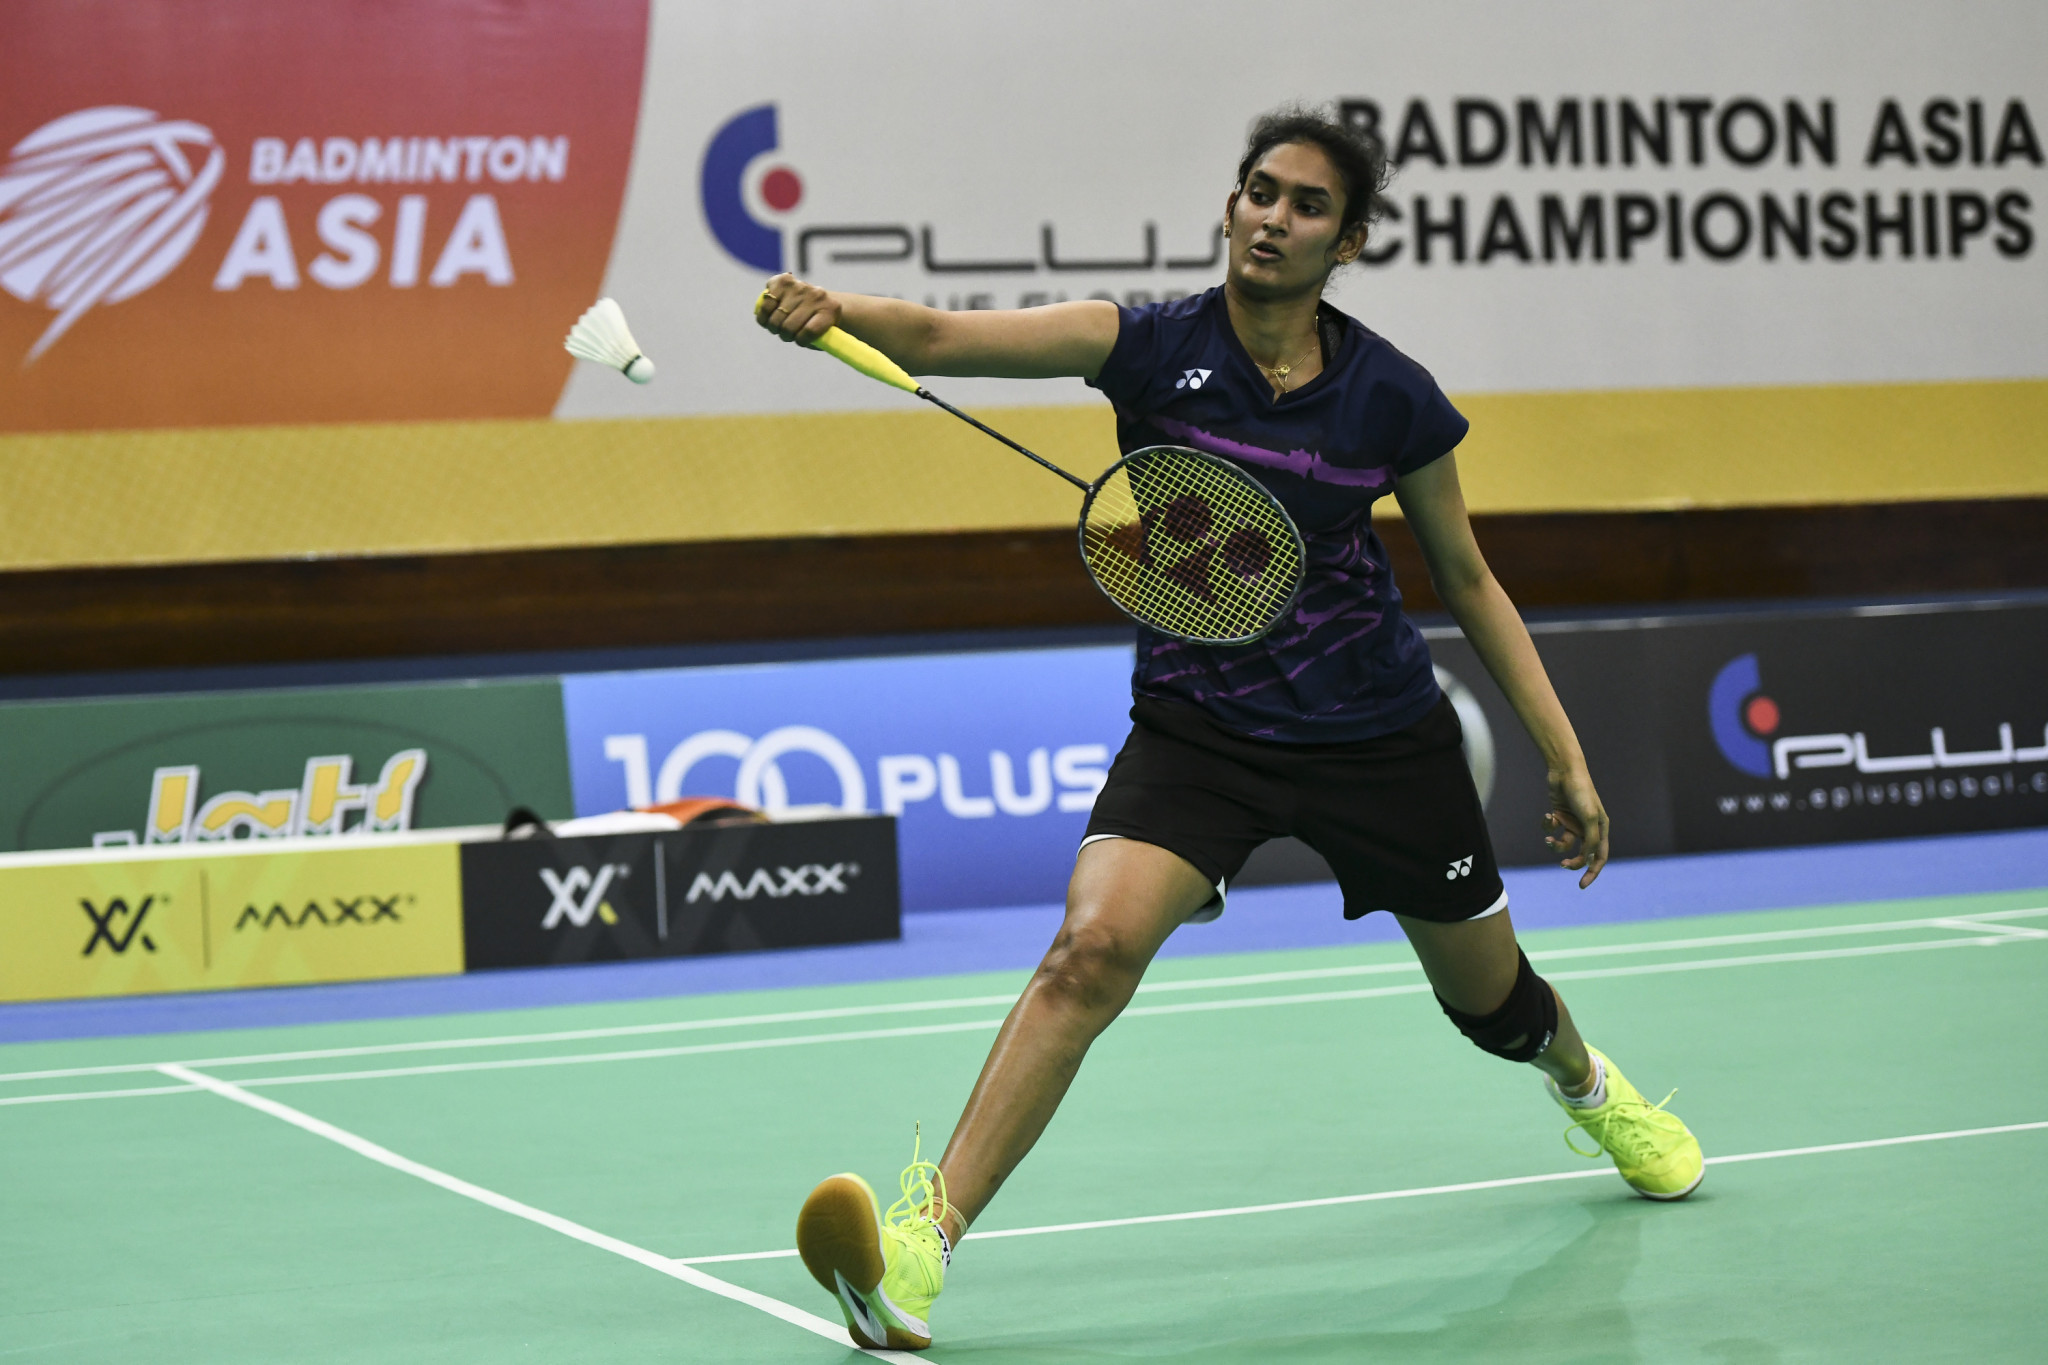 India survive scare on opening day of Badminton Asia Team Championships